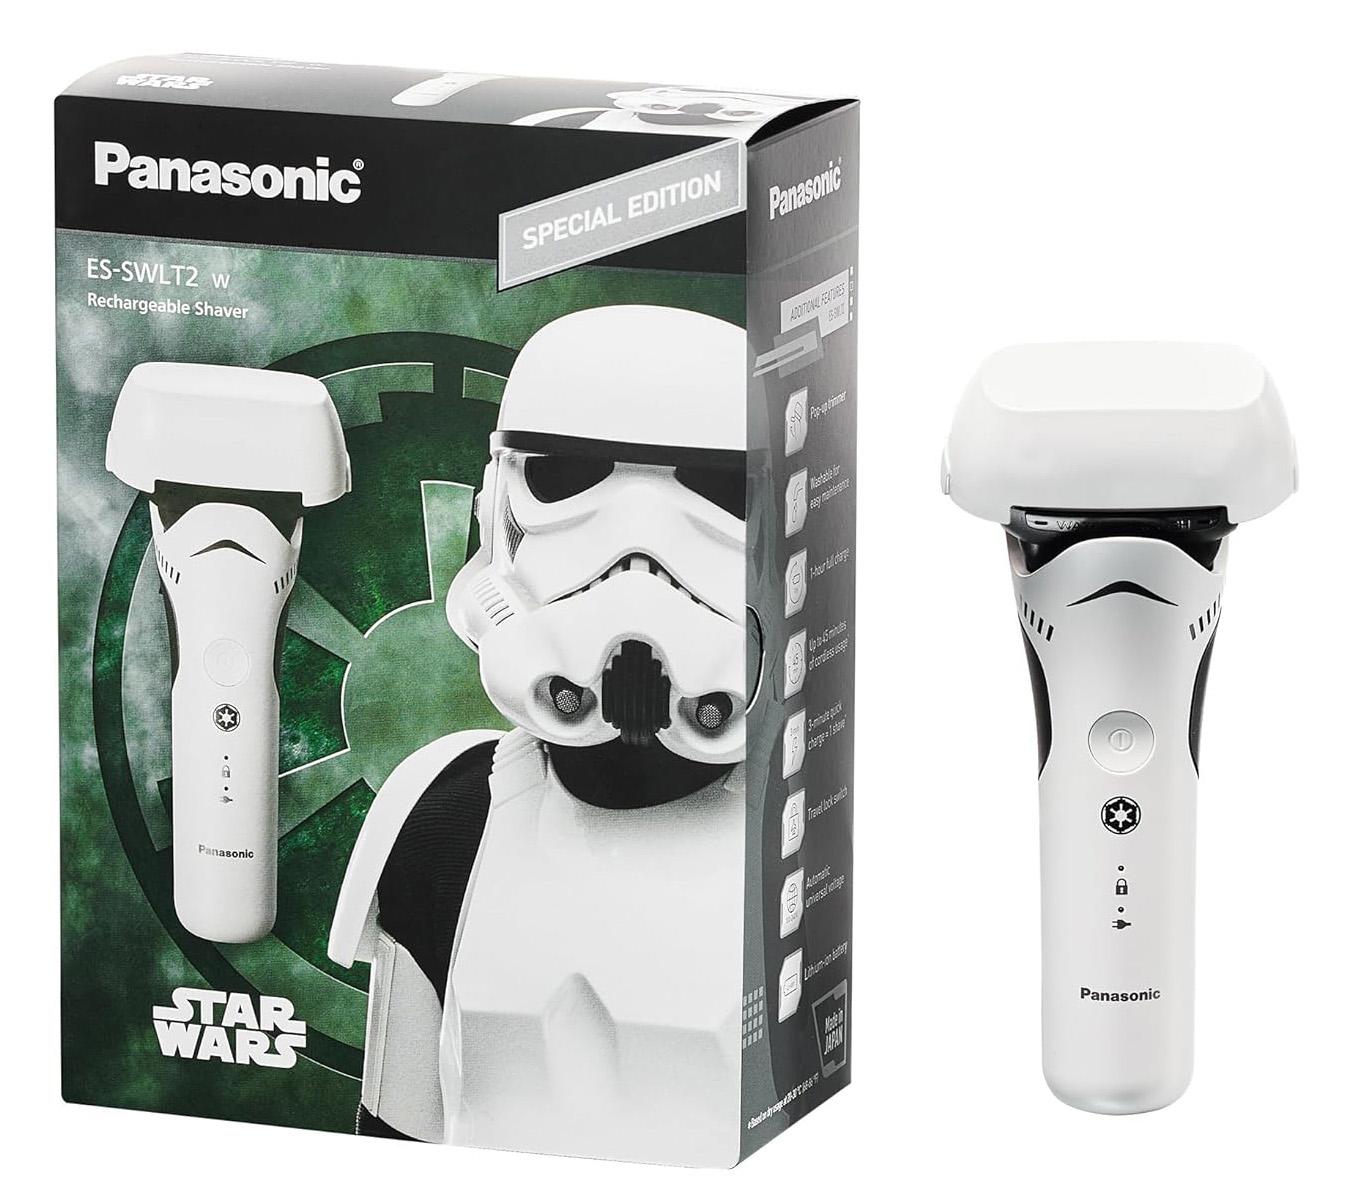 Panasonic Electric Shaver Special Edition Star Wars Stormtrooper for $124.99 Shipped